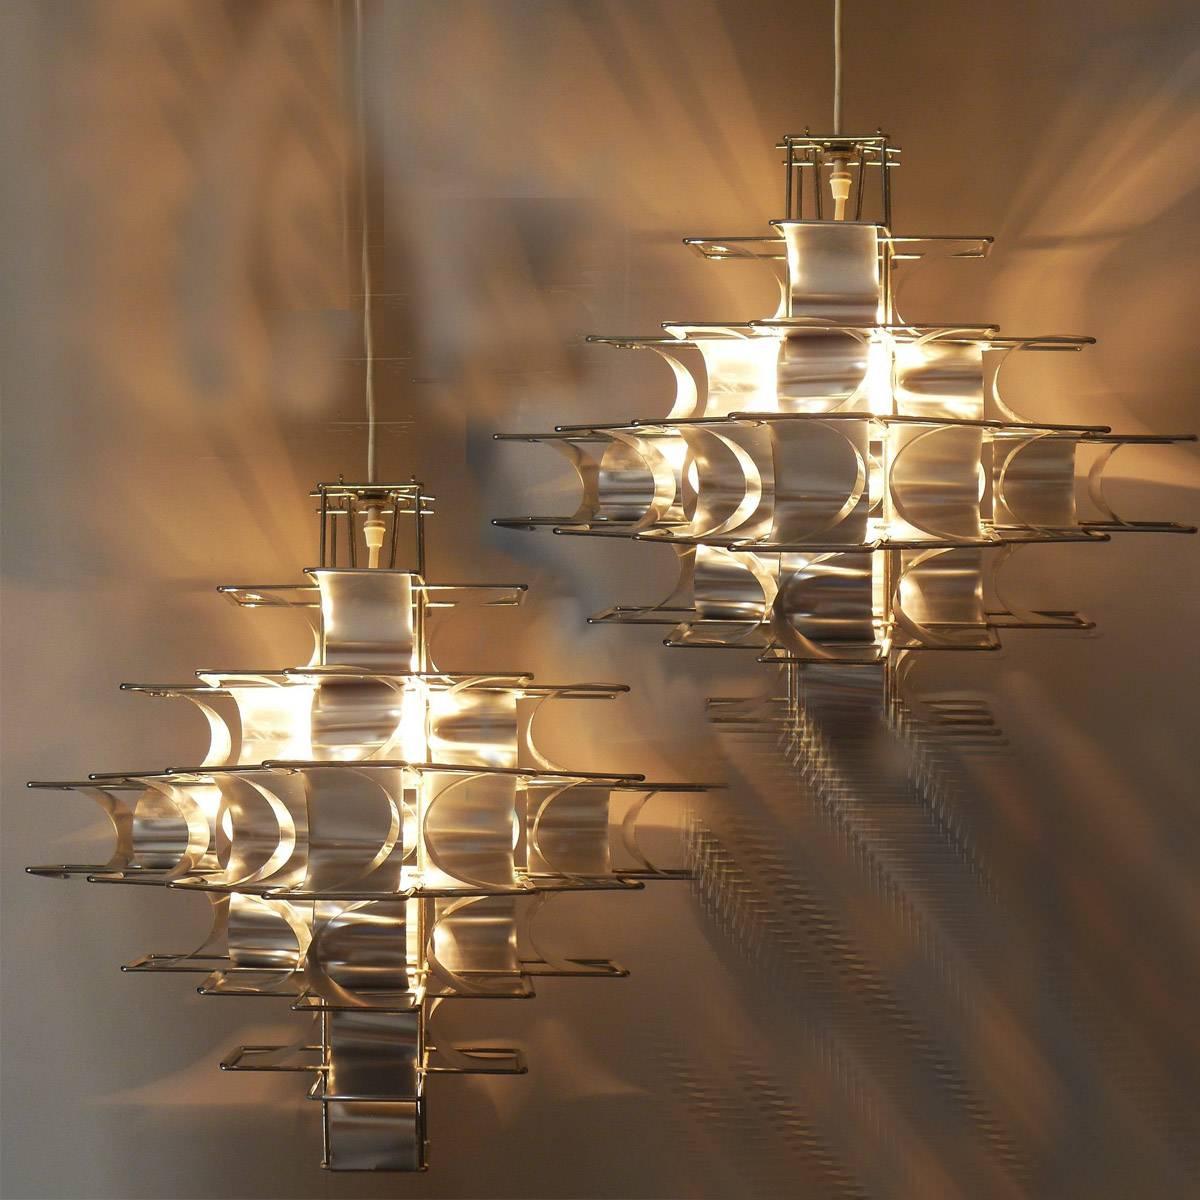 Two wonderful ceiling lamps, designed by Max Sauze for the Max Sauze Studio in 1970. This lamps are is the biggest of the two cassiopee lamps.

We also have a matching Max Sauze table lamp. Ask for availibility. 
 
The lamps are handmade of a